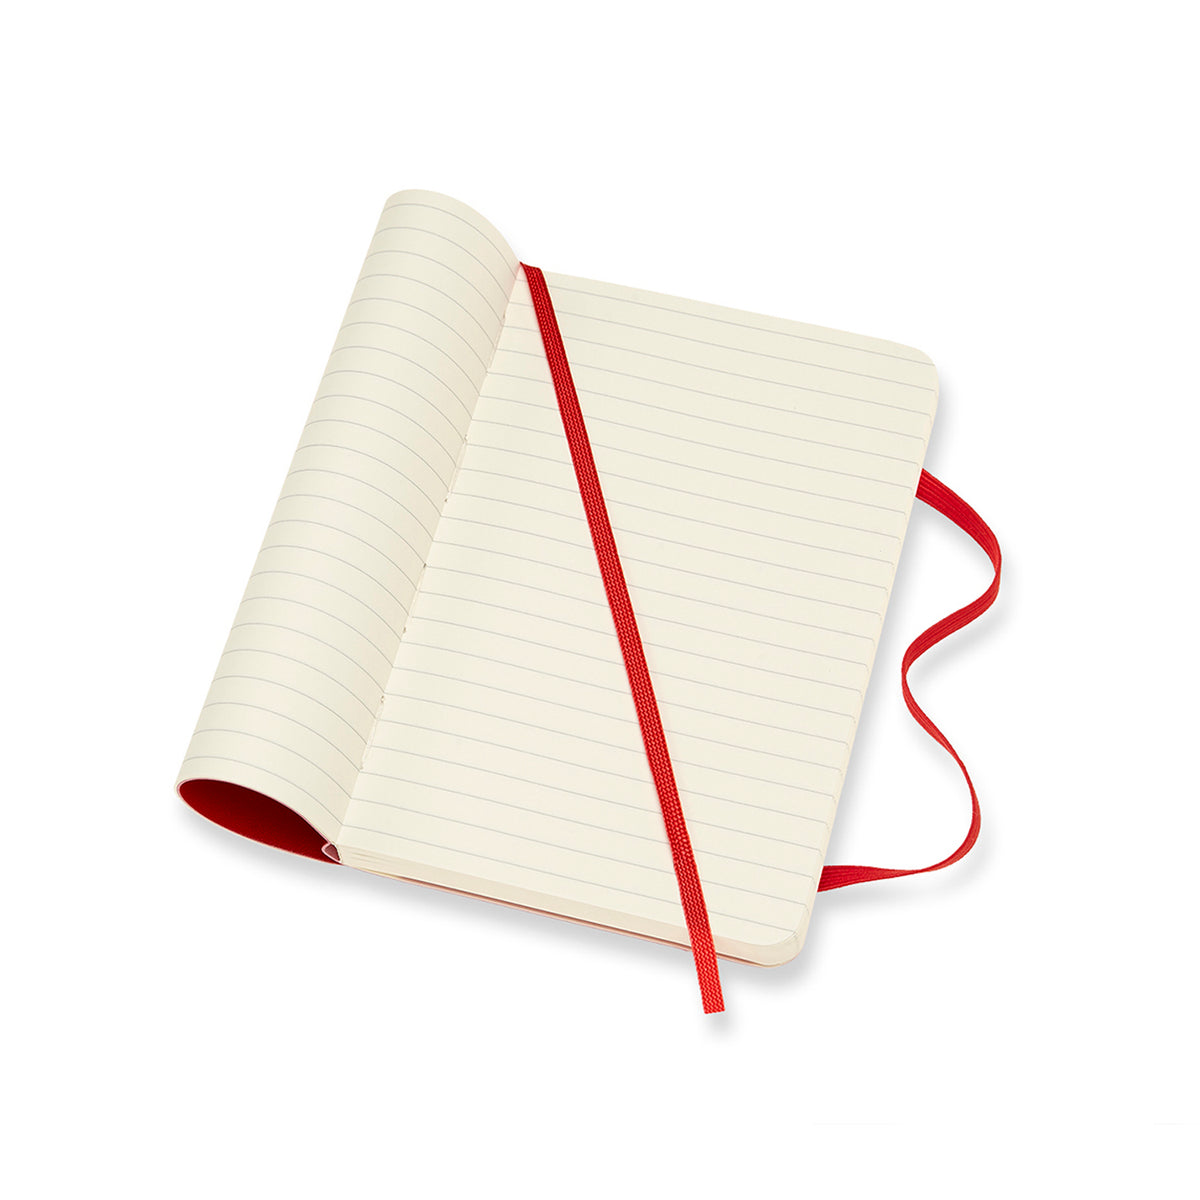 Moleskine - Classic Soft Cover Notebook - Ruled - Pocket - Scarlet Red